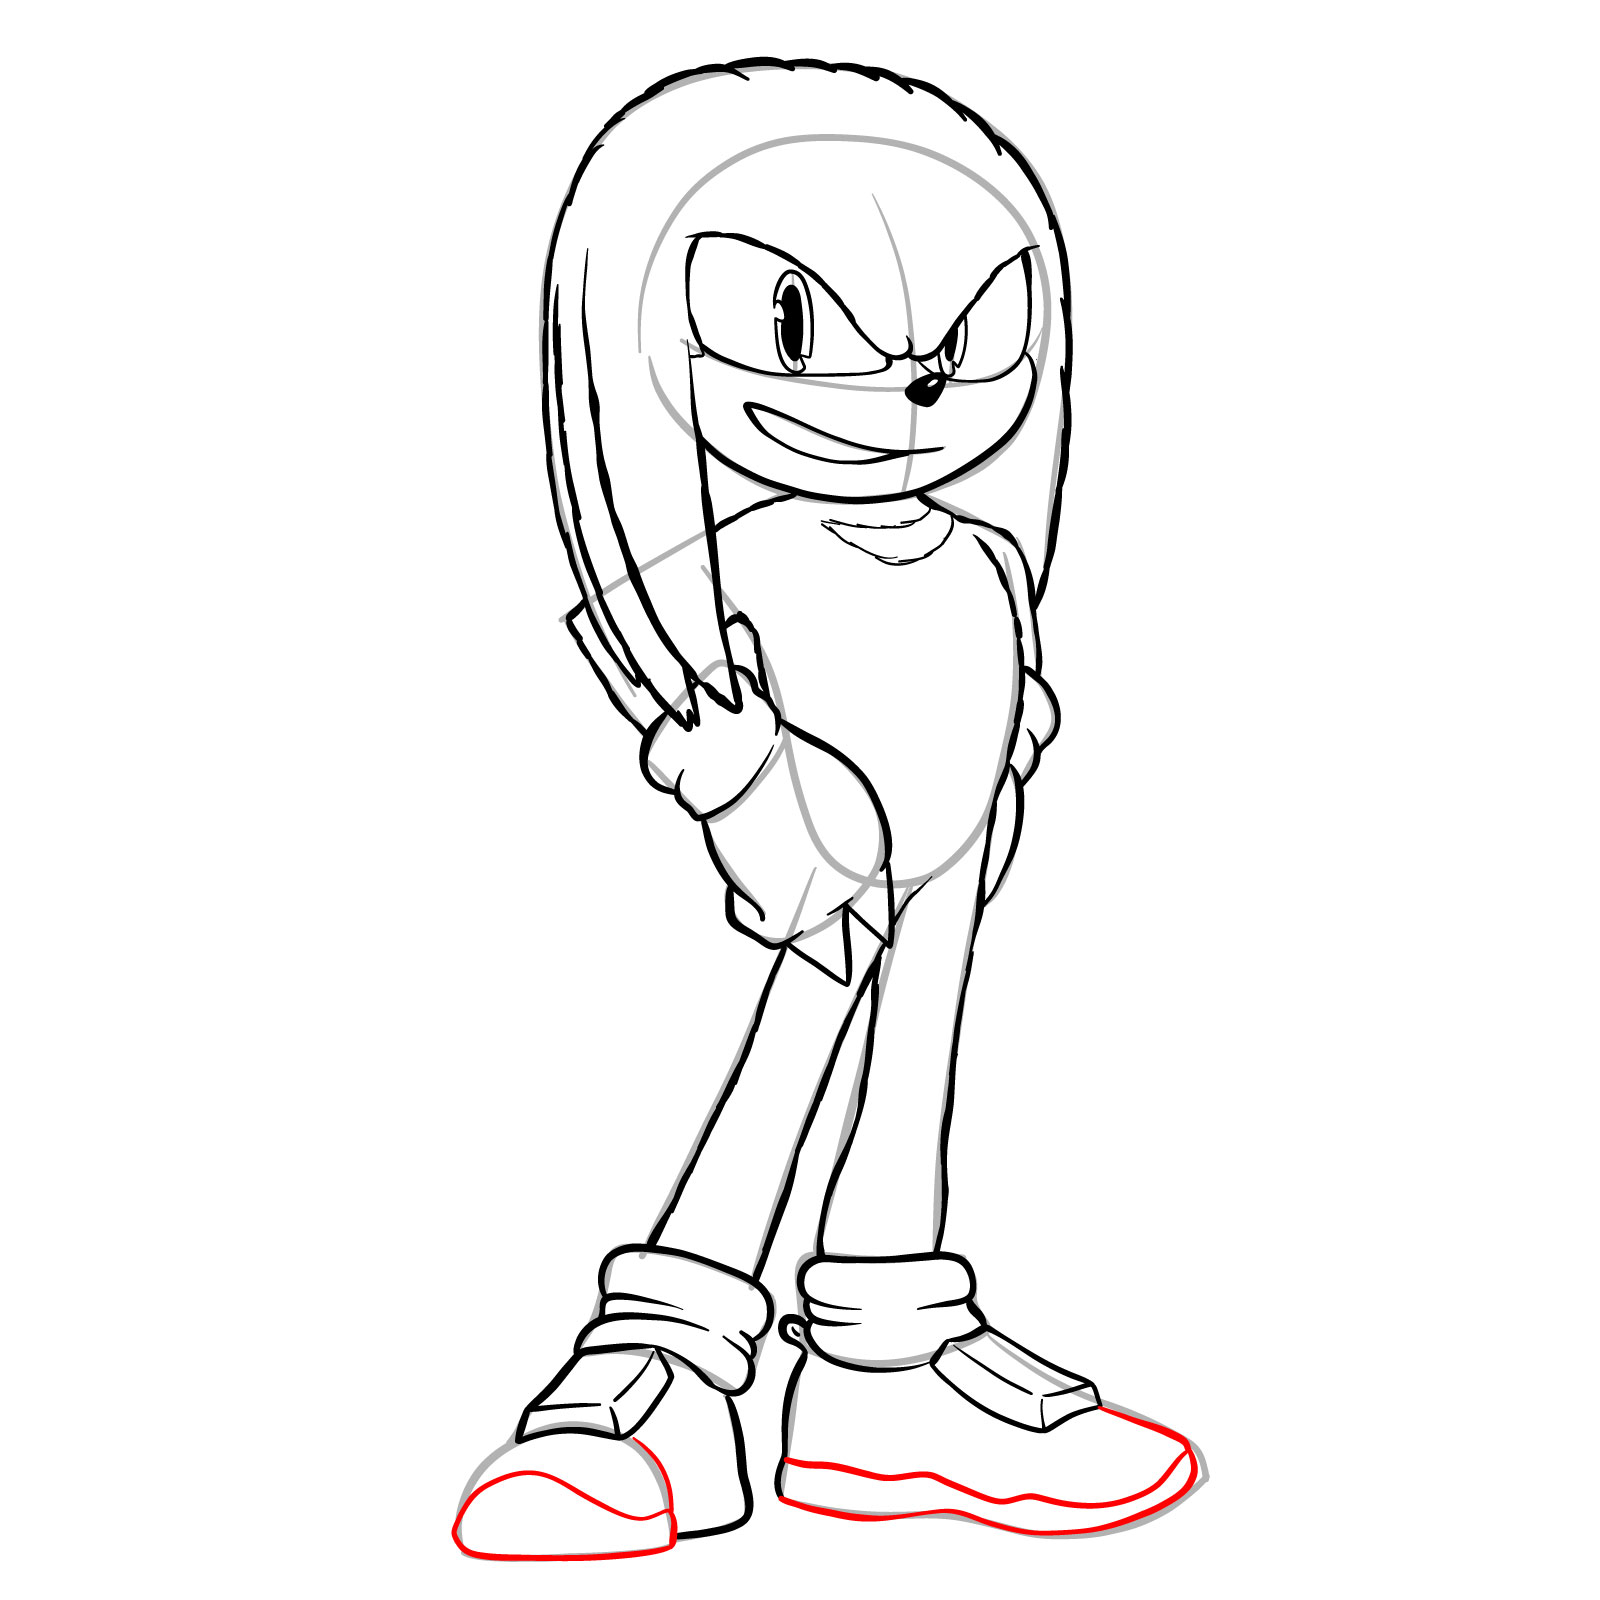 How to draw Knuckles from the movie - step 21